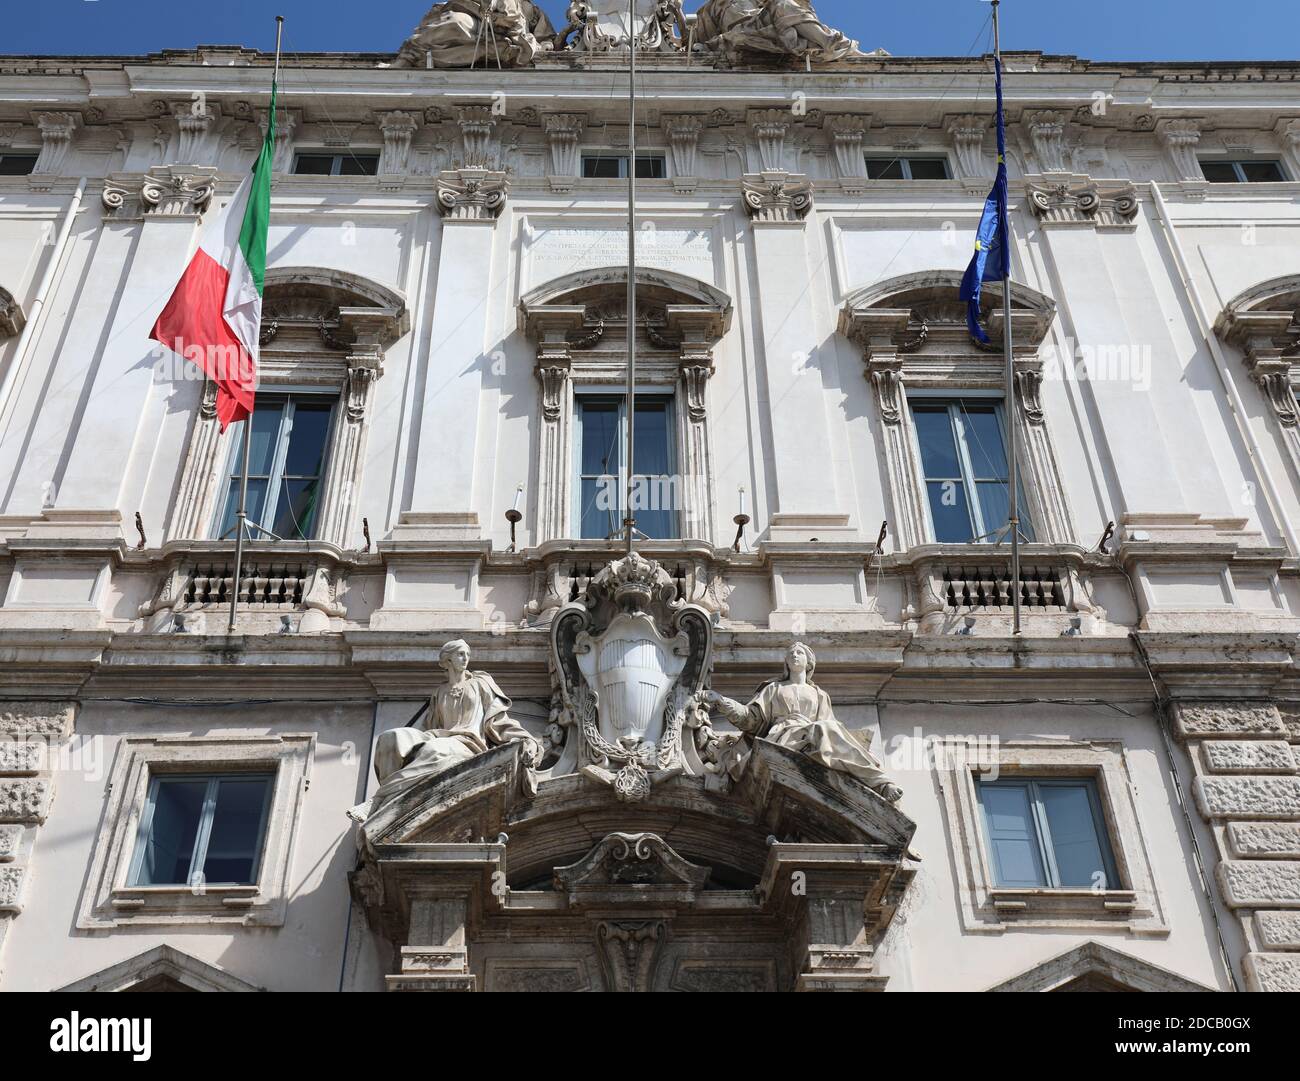 ROMA, RM, Italy - August 17, 2020: facade of Palace called PALAZZO CHIGI seat of government Stock Photo